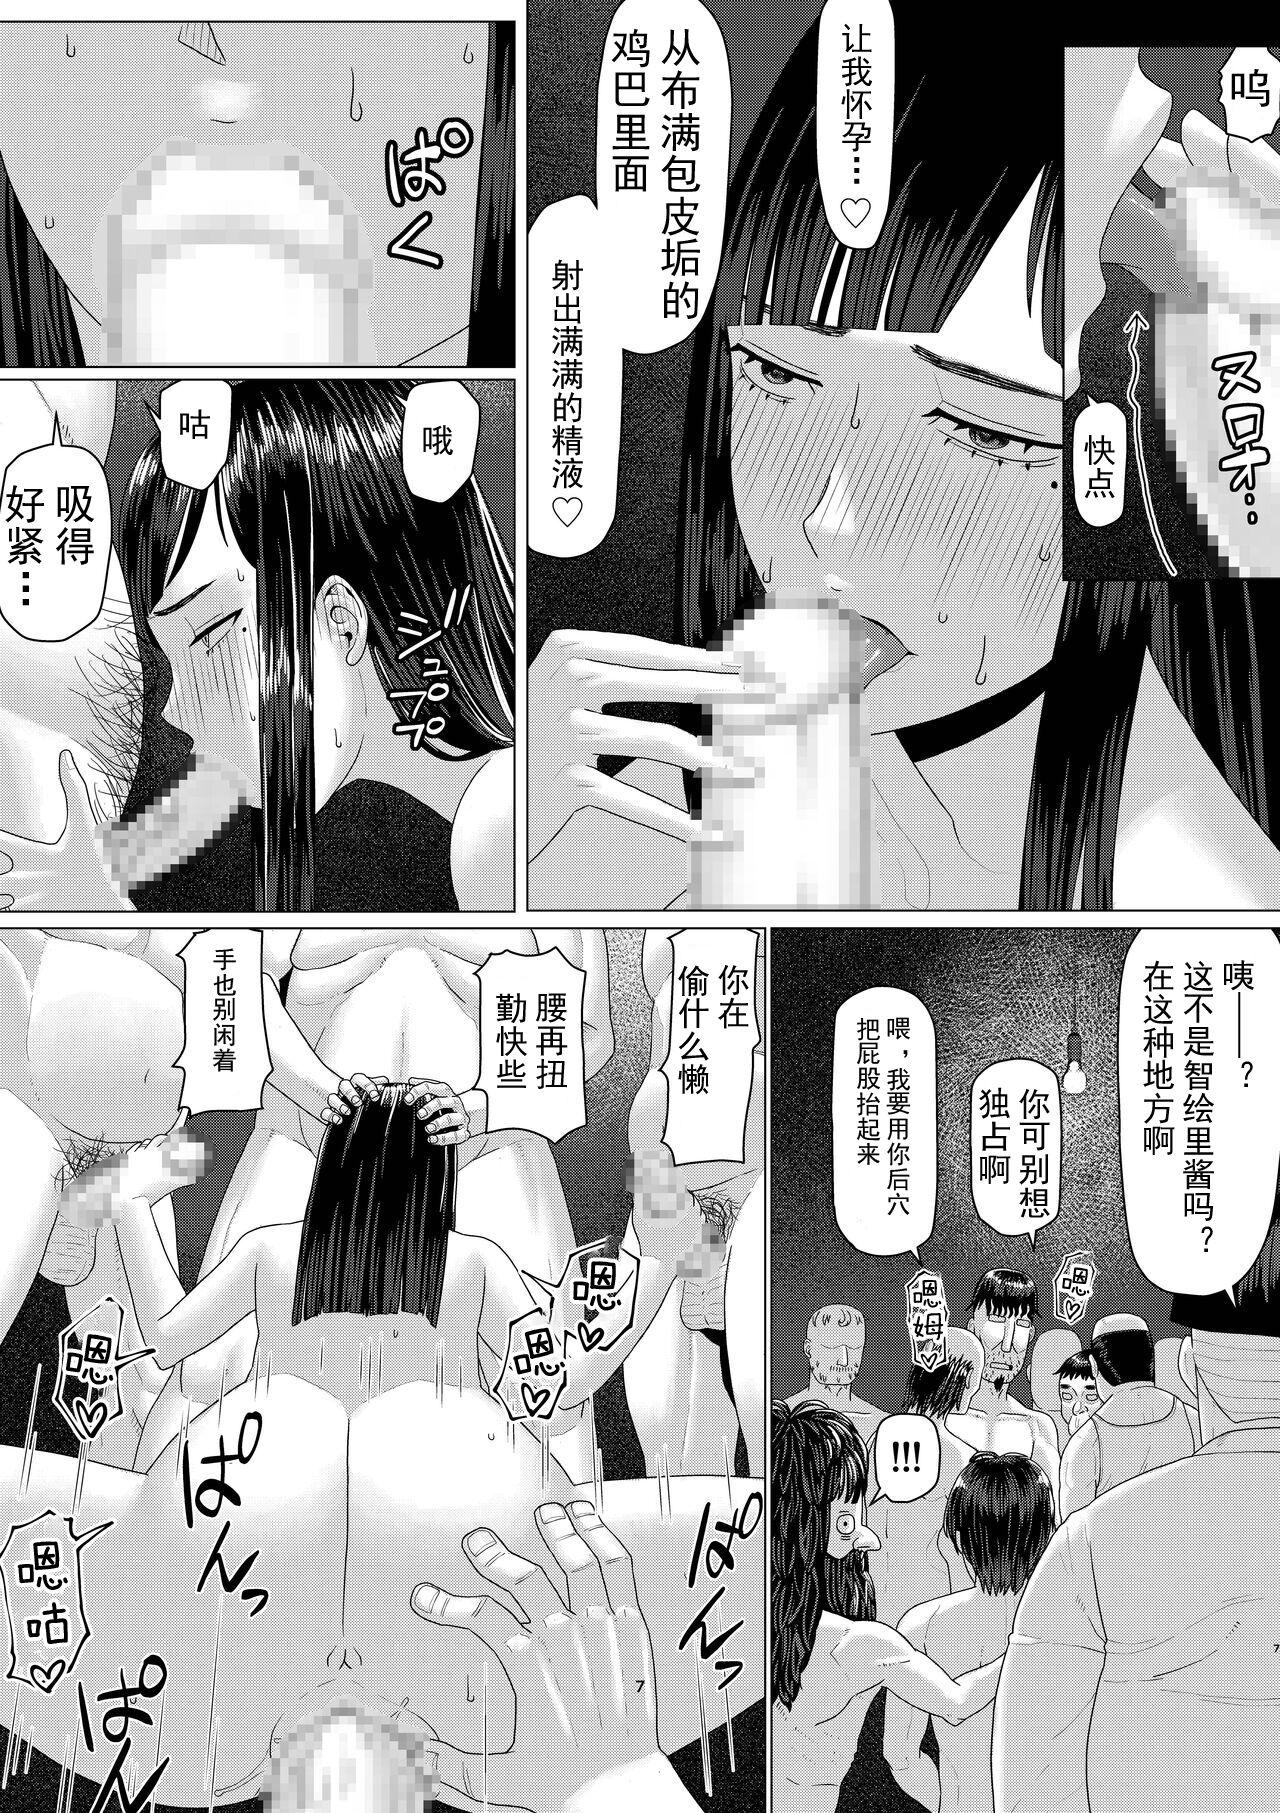 Fresh Chieri can't lose! 3 -Perverted toilet wife who fertilizes anyone's sperm with her husband's official approval- Volume 2 [Chinese] [超勇漢化組] - Original Oral Sex Porn - Page 8